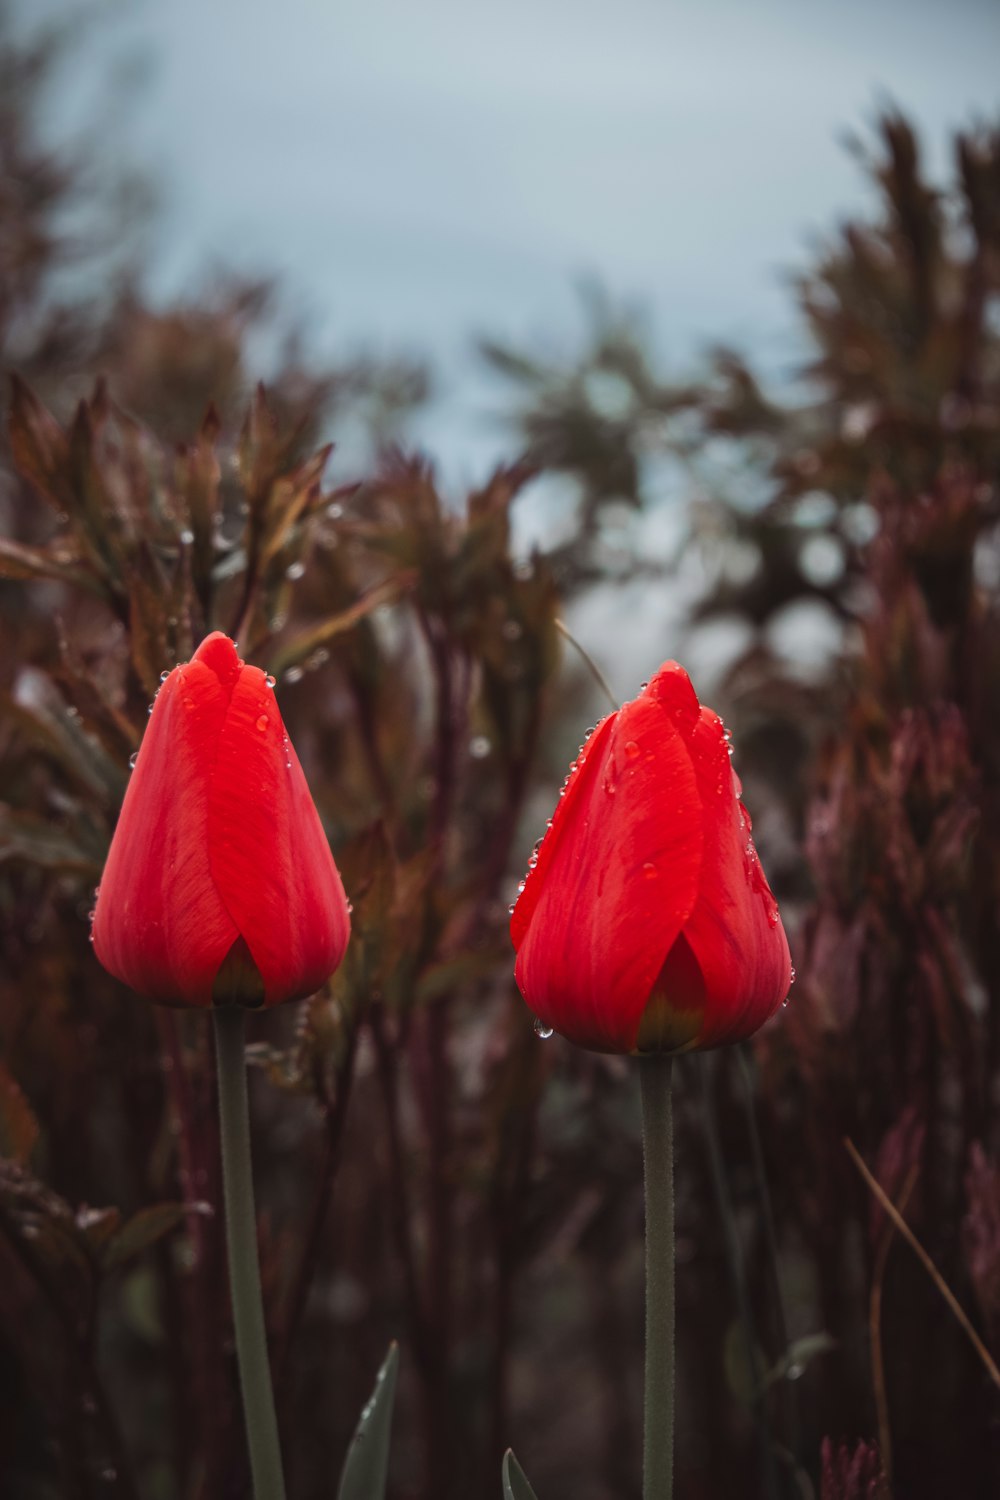 two red flowers with water droplets on them